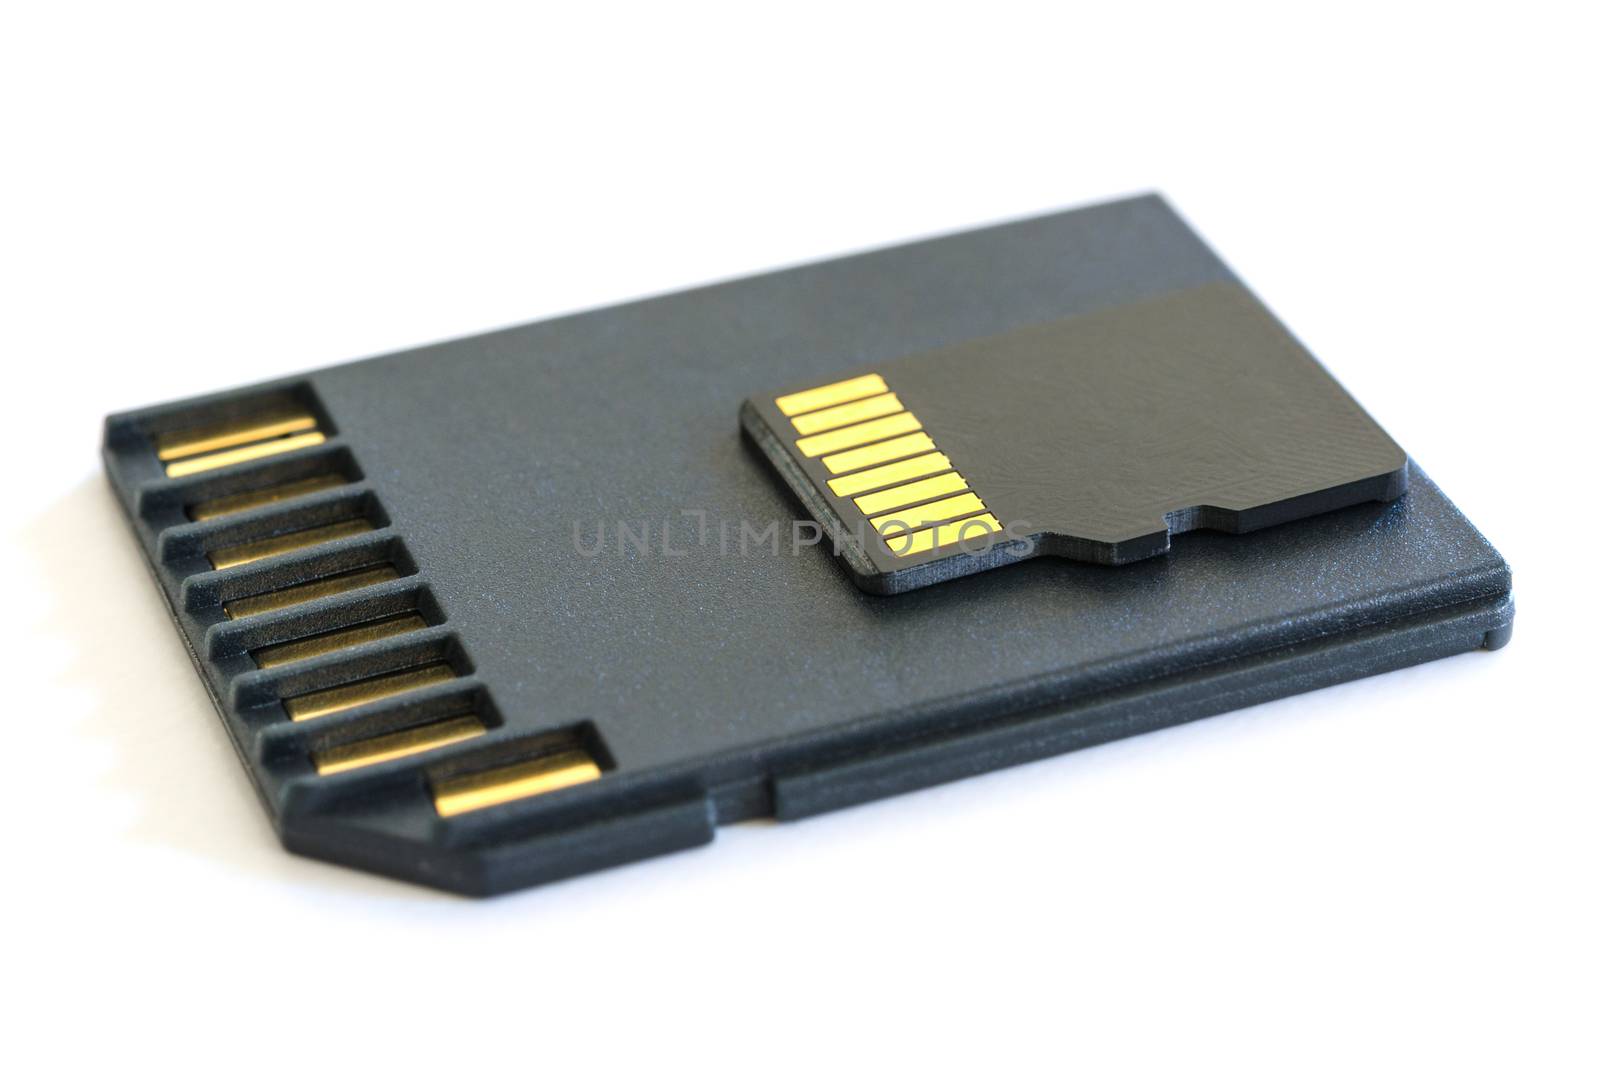 MicroSD card for mobile devices and SD reader adapter isolated on white